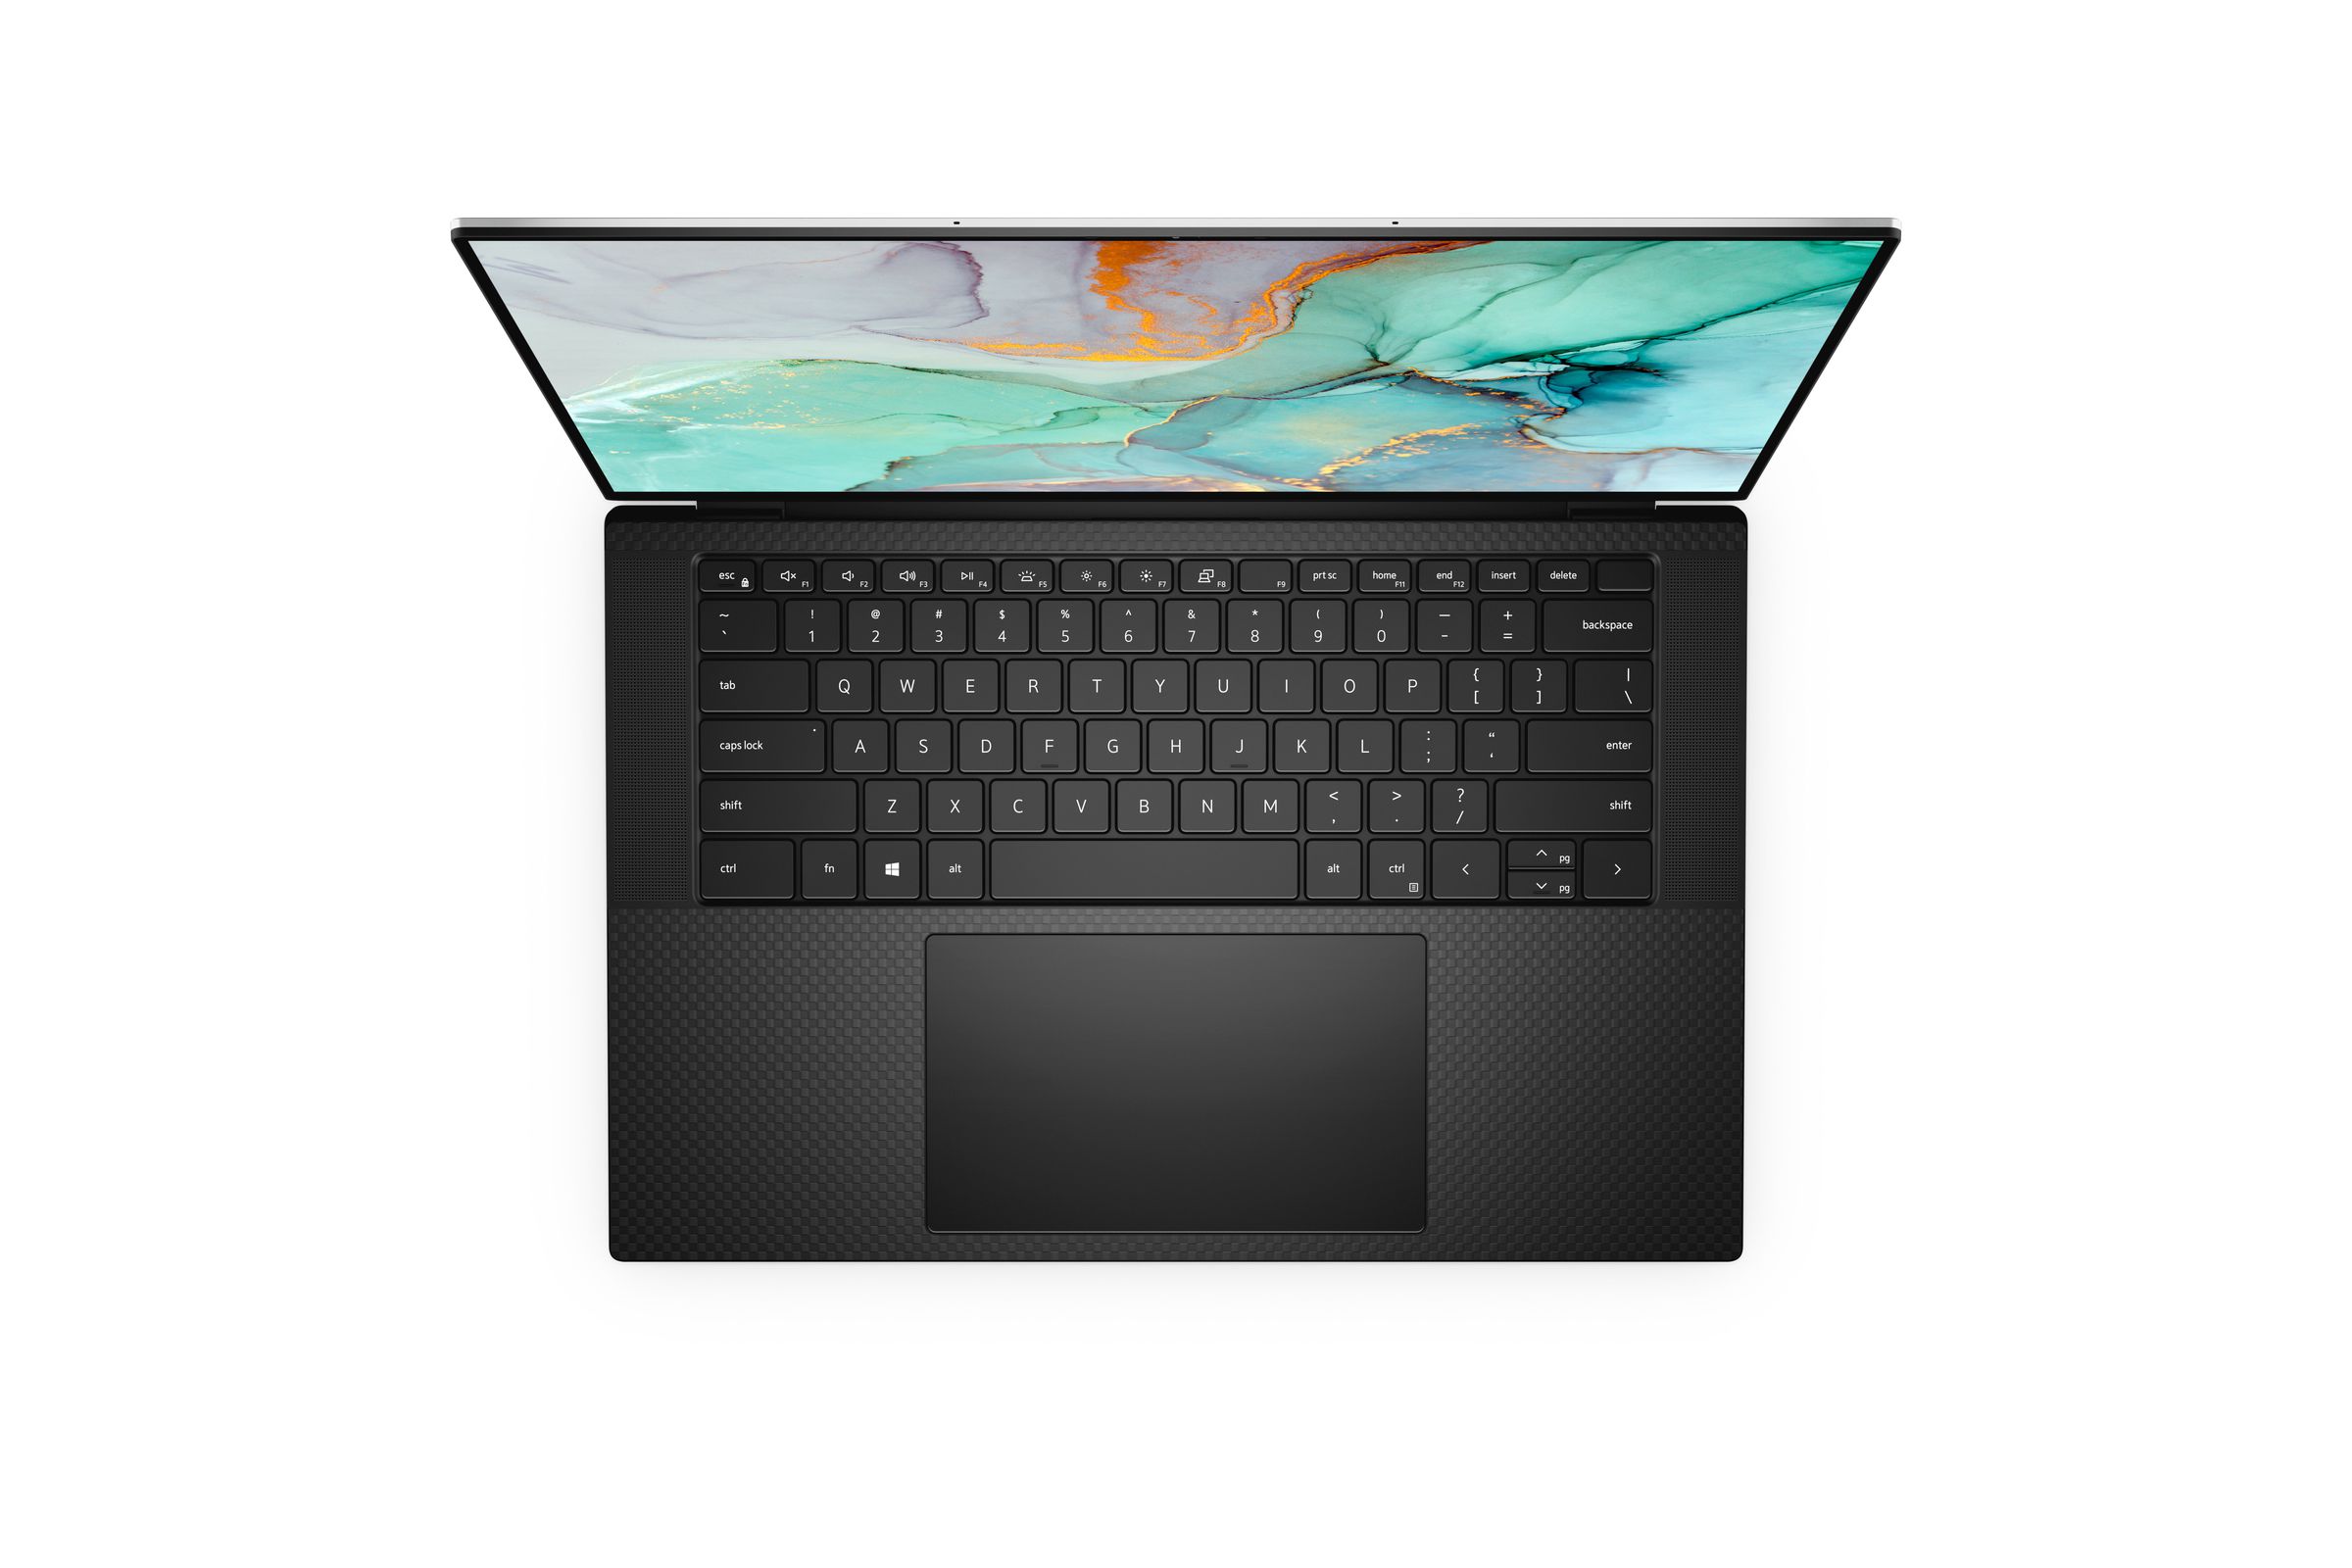 The XPS 15.